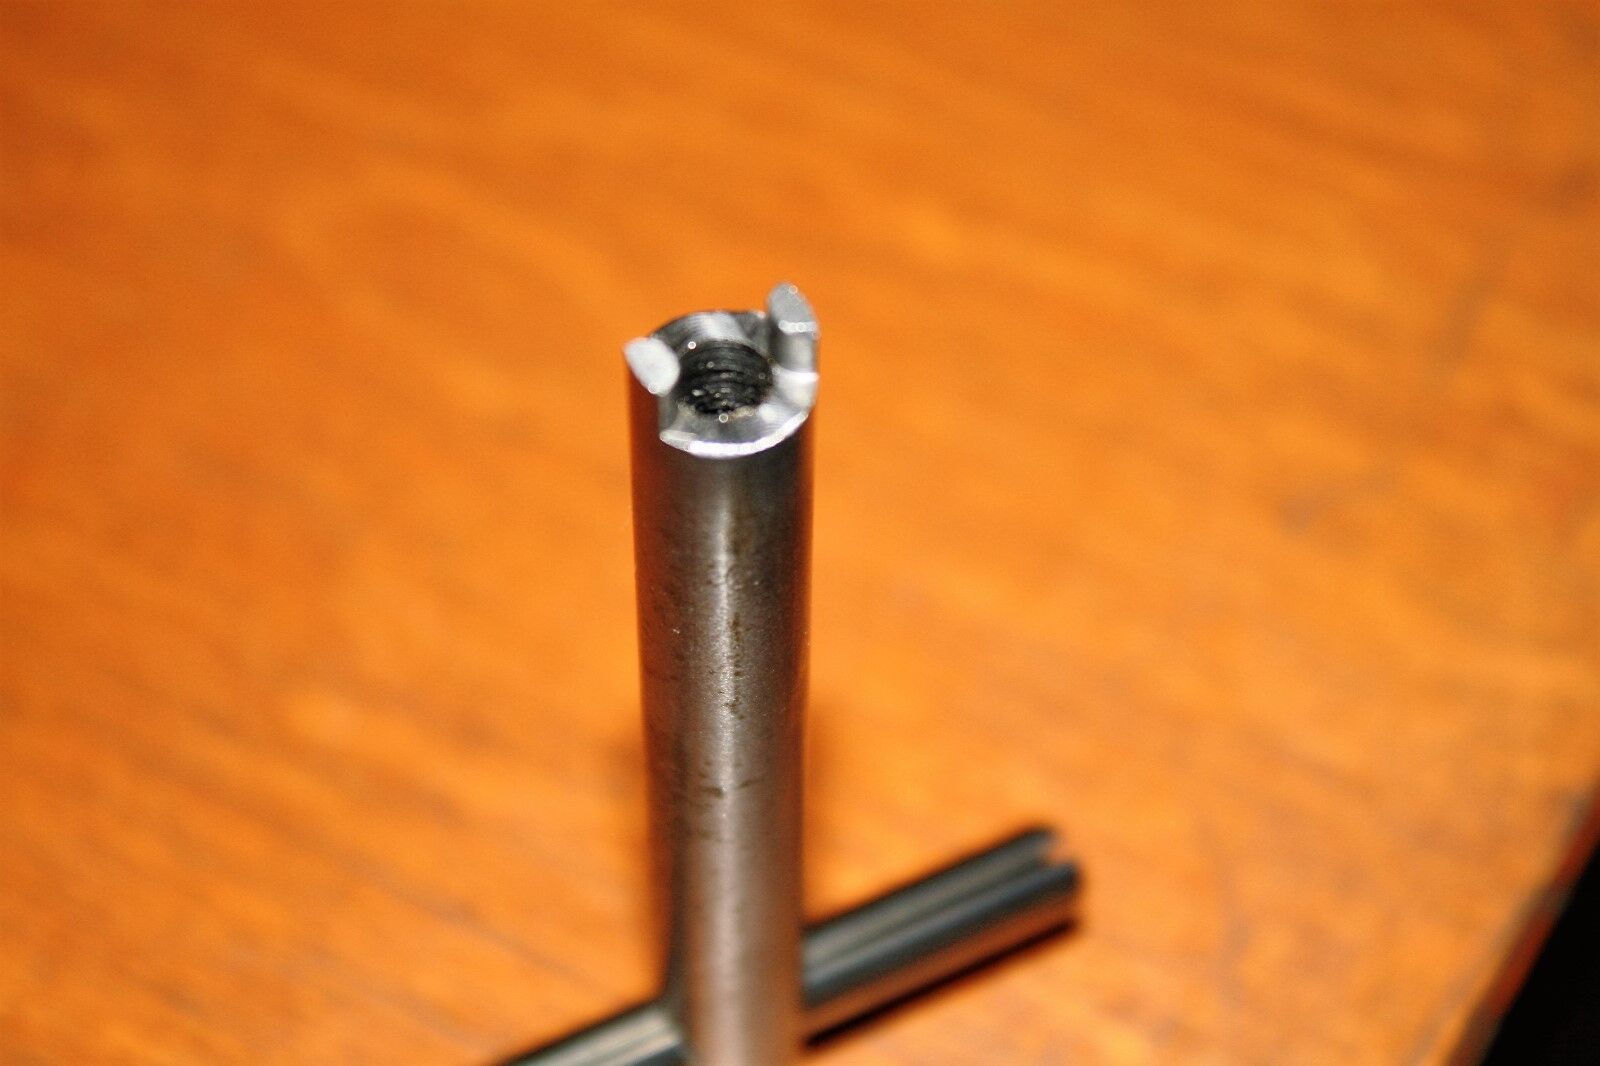 Lee Enfield SMLE Firing Pin Removal Tool fits #1 and #4